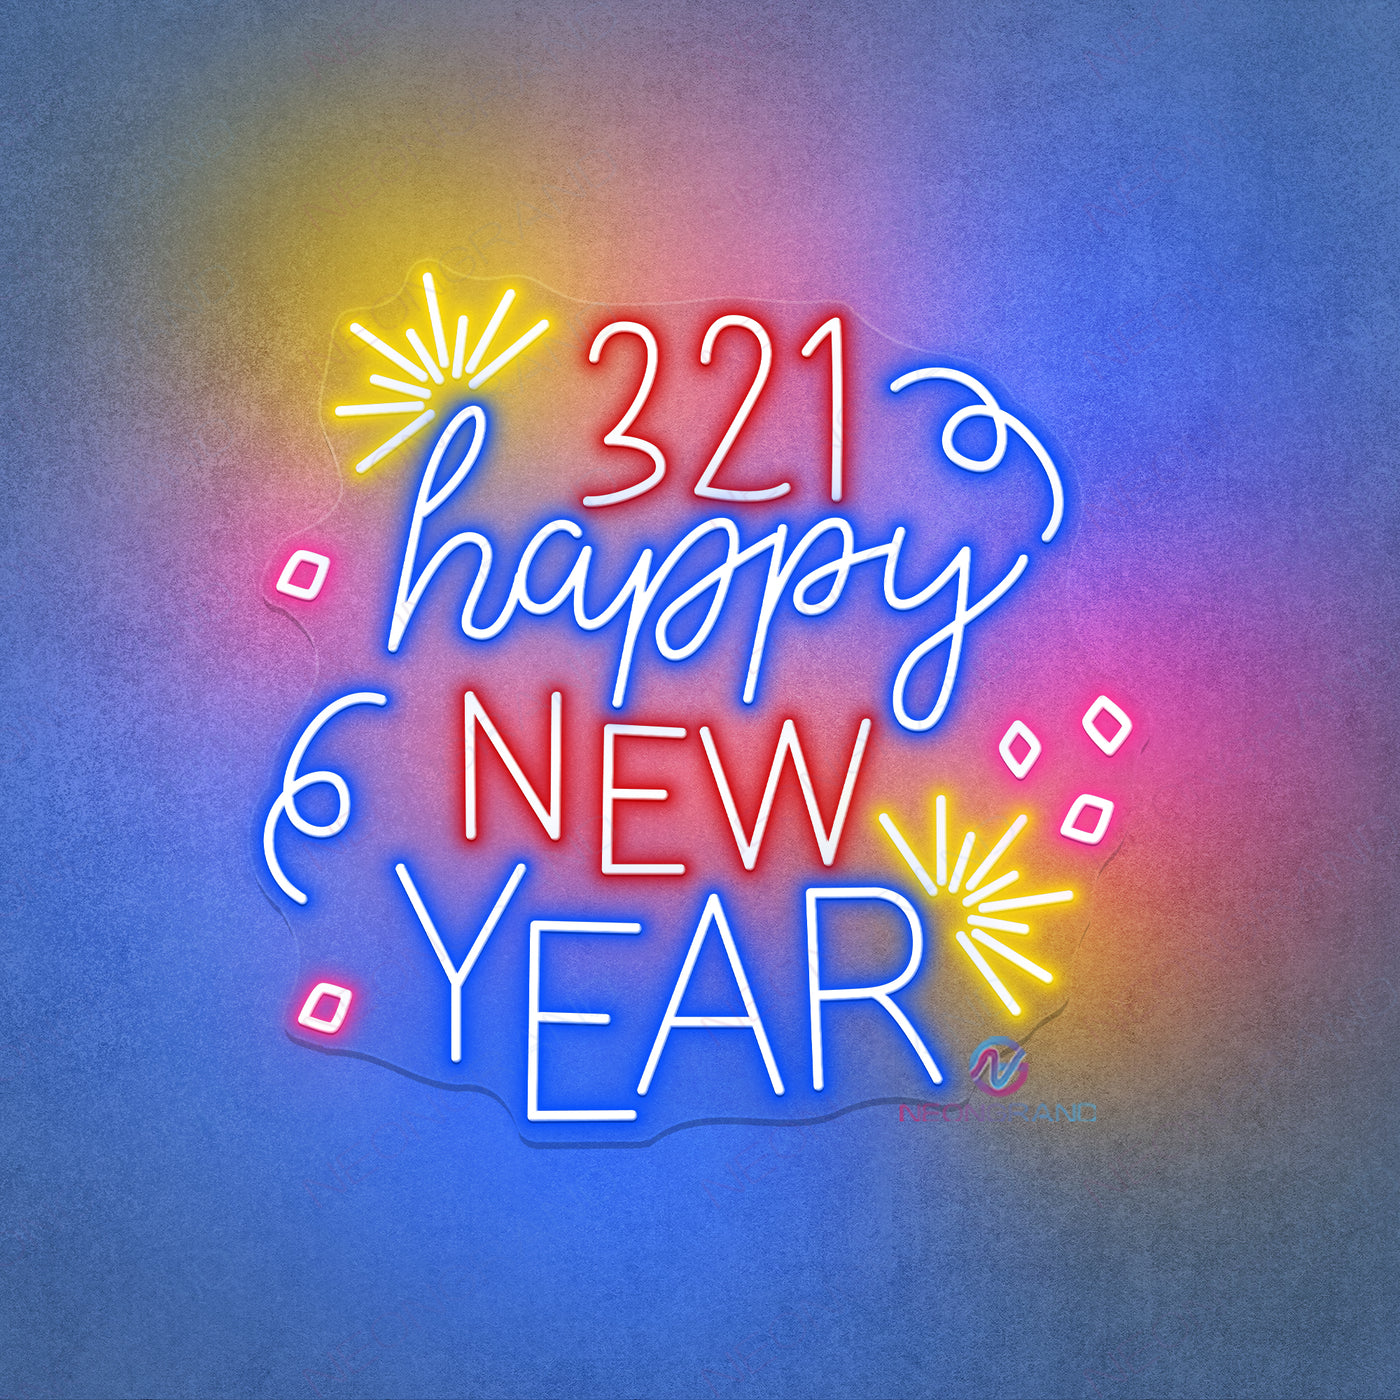 321 Happy New Year Neon Sign Led Light